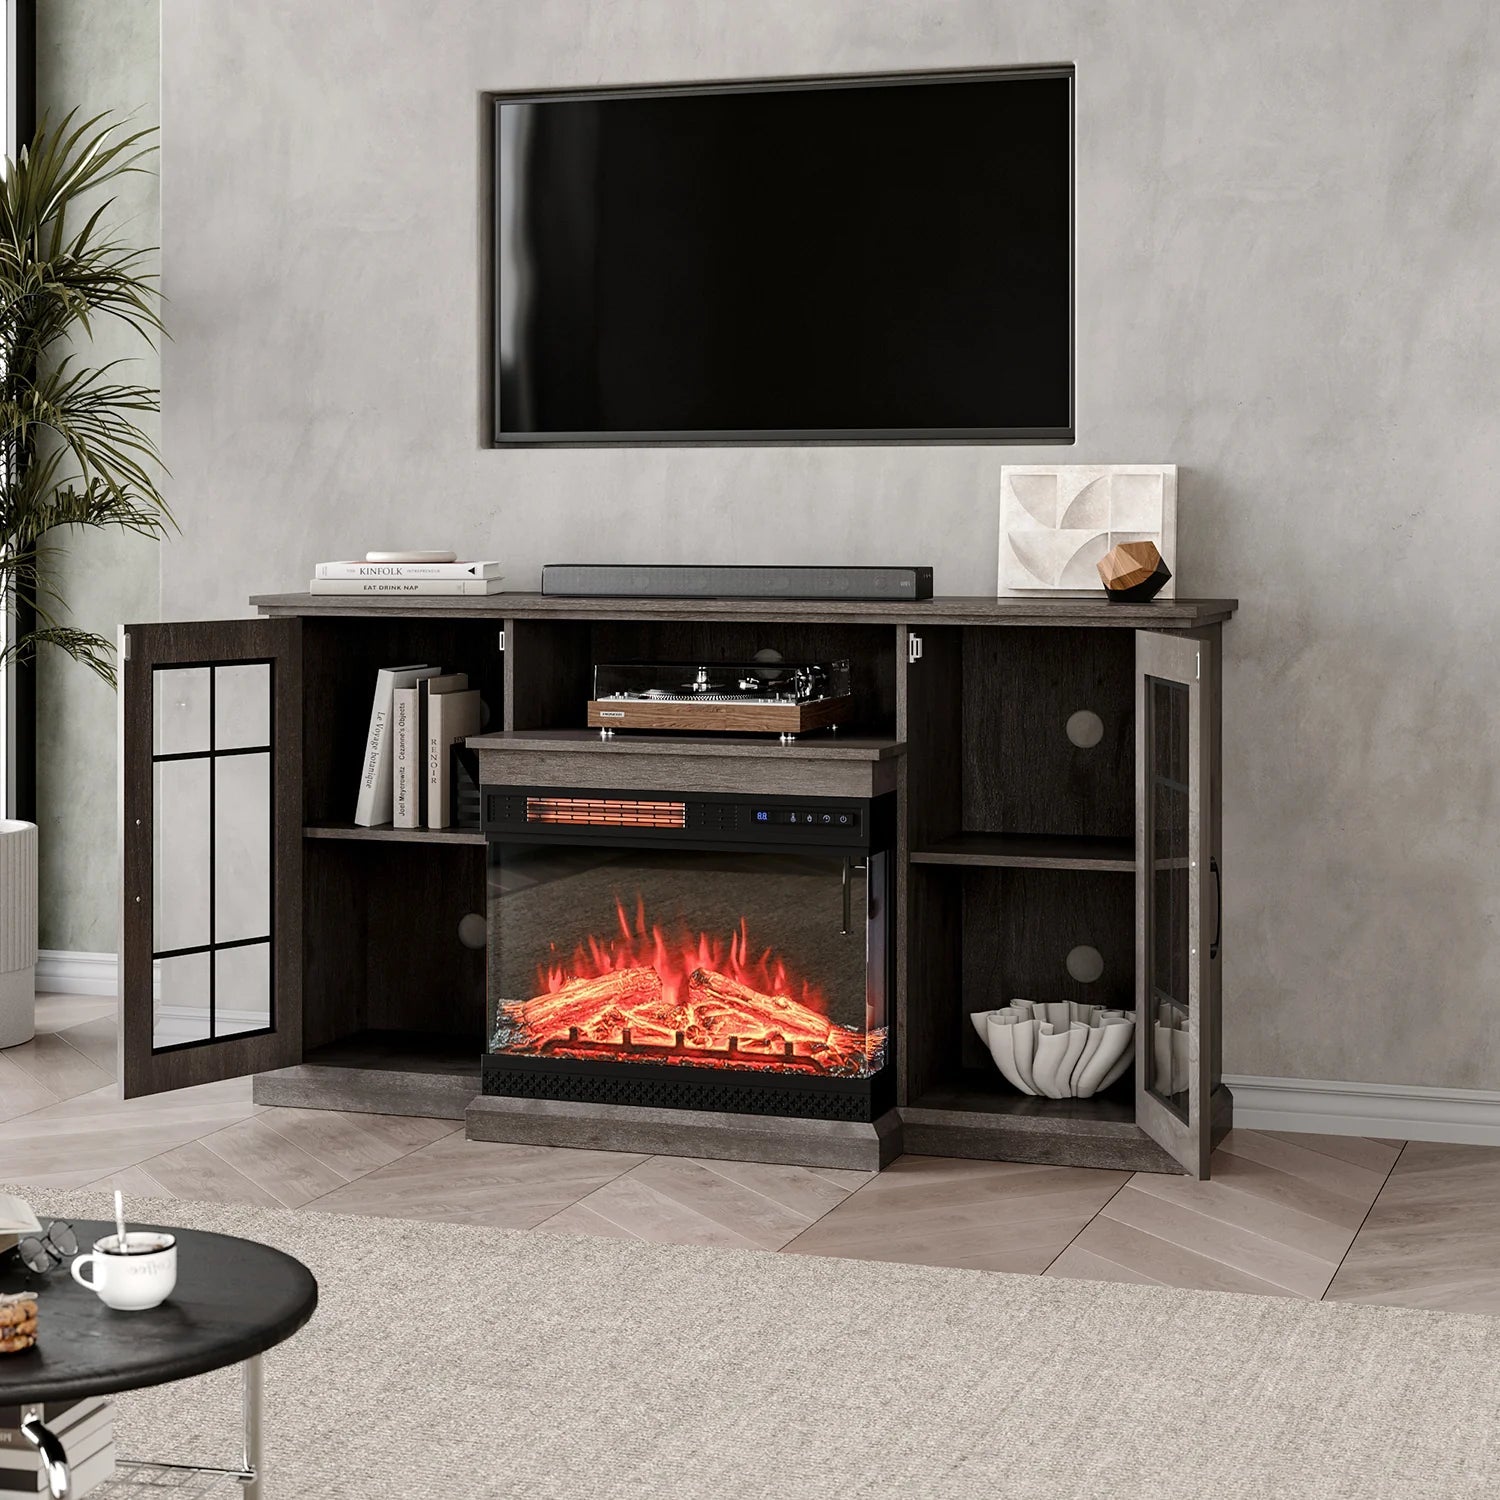 5ft Freestanding Fireplaces 3-Sided 24 Inch Electric Fireplace Rustic Grey TV Stand With Remote Control Freestanding Fireplaces Living and Home 